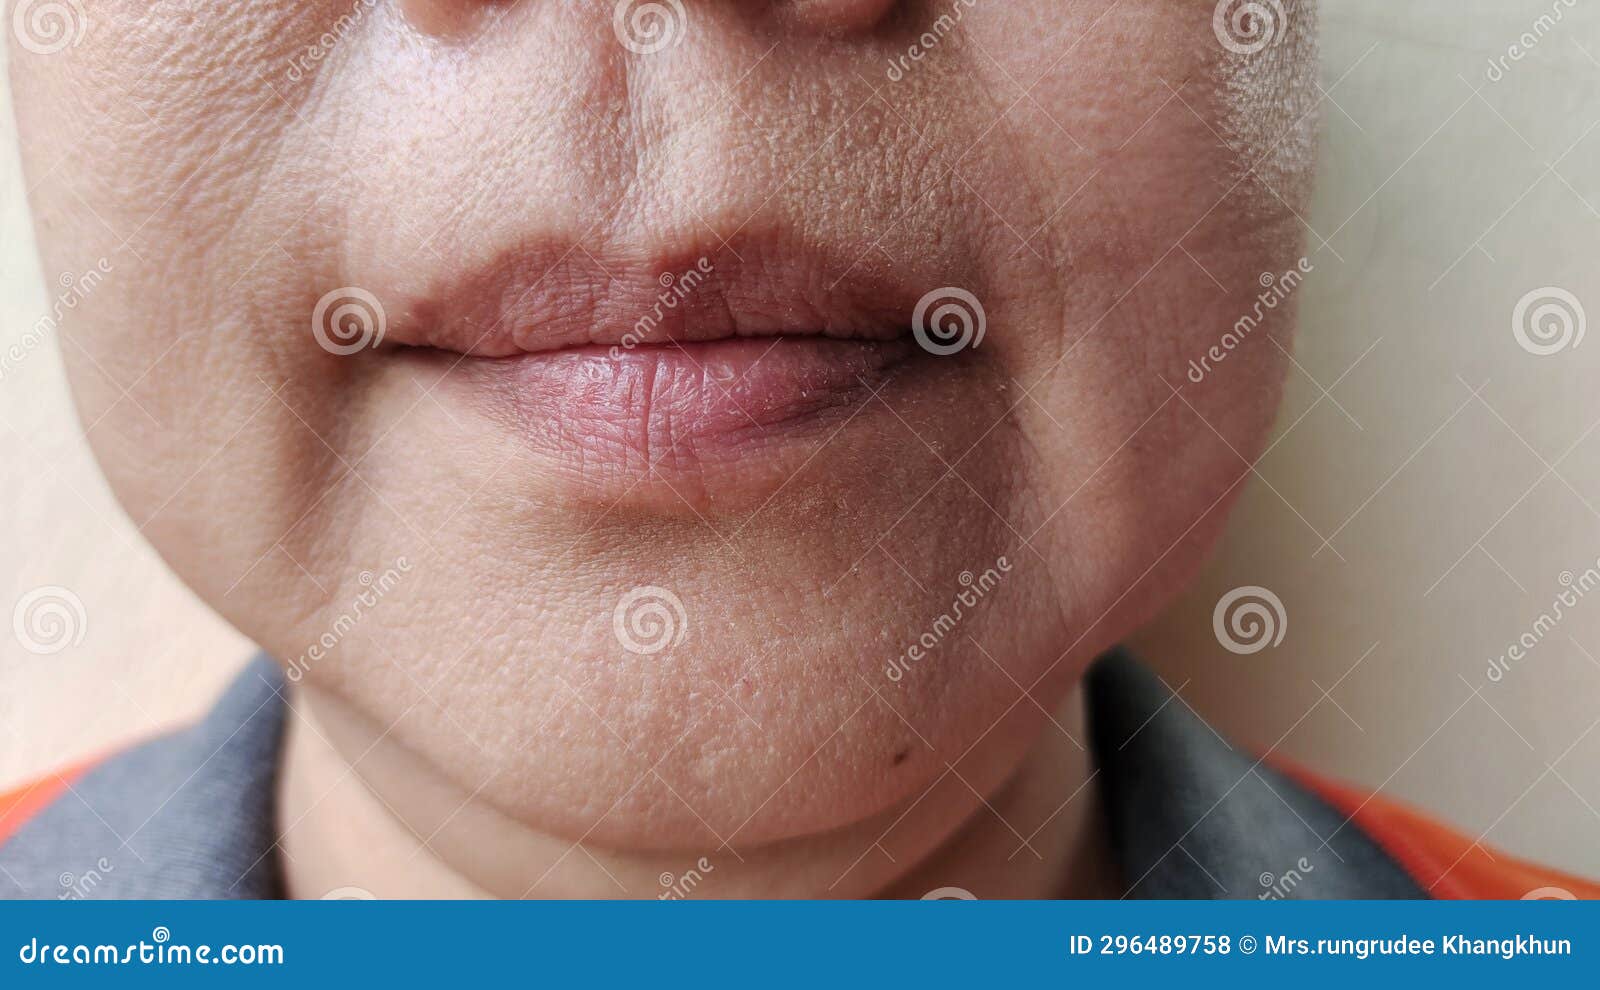 the flabby and wrinkles beside the mouth, problem blemishes and dark spots on the face.